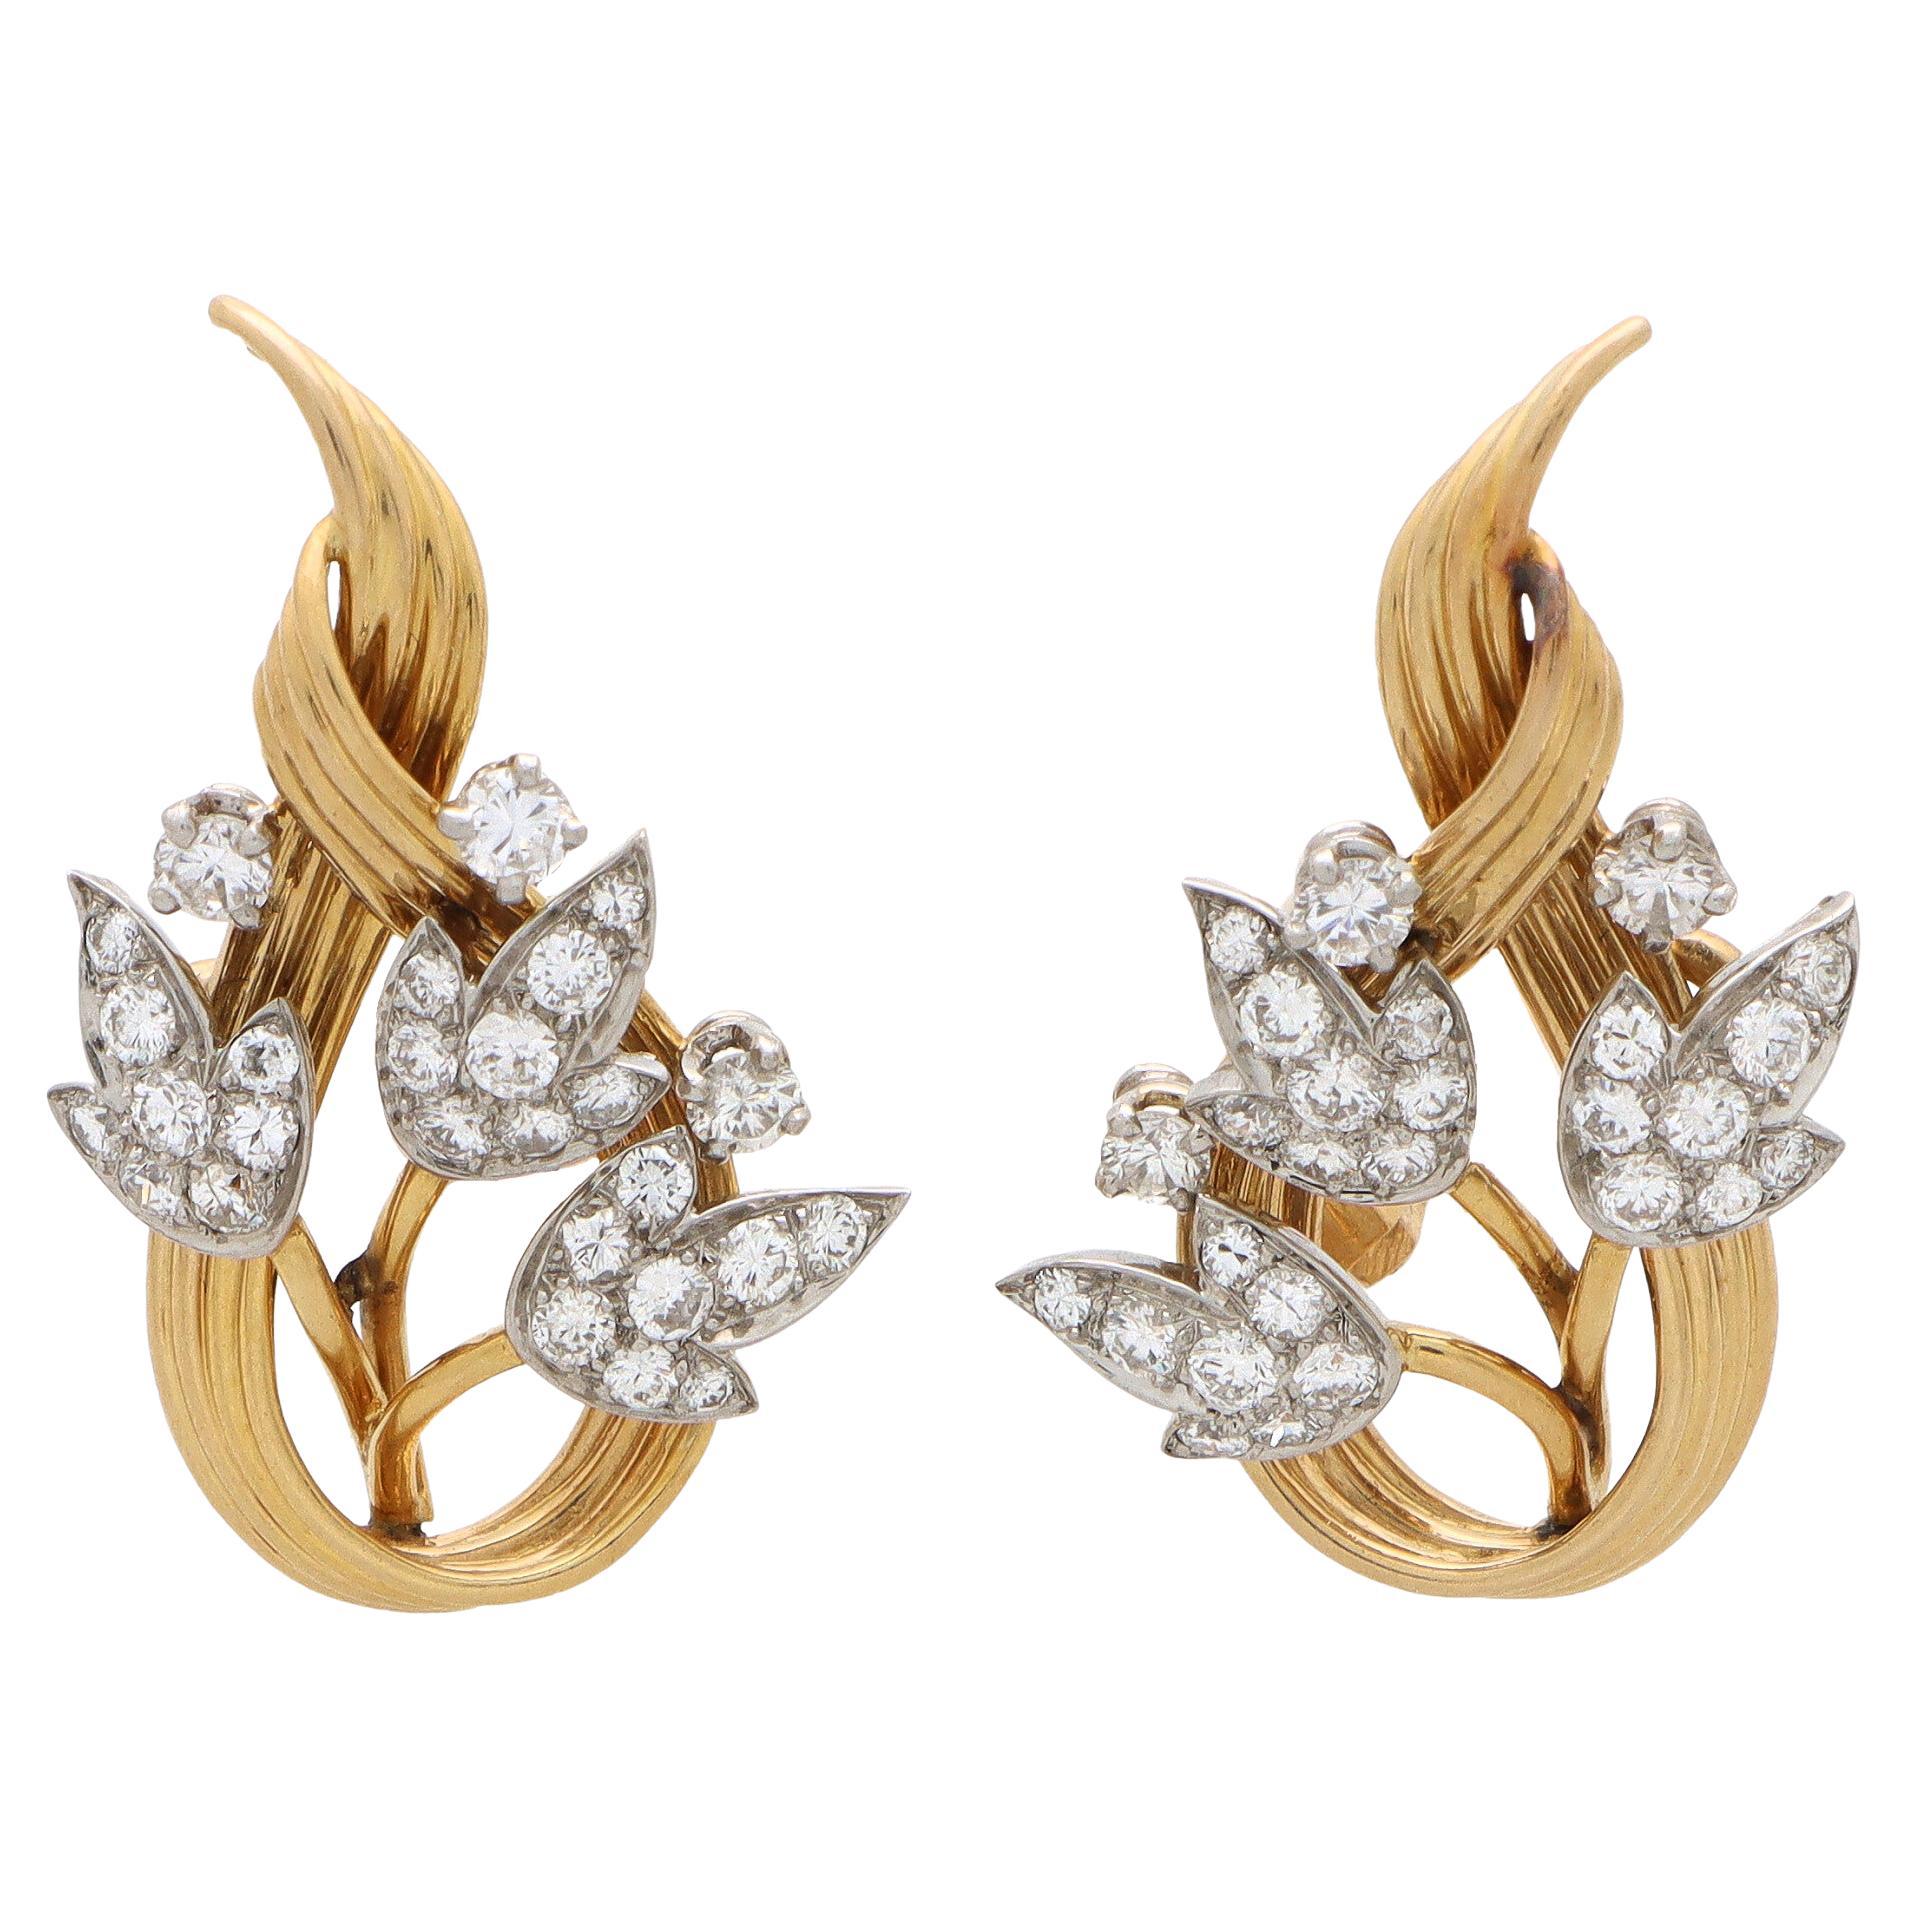 Vintage 1950’s Floral Diamond Spray Earrings Set in 18k Gold and Platinum